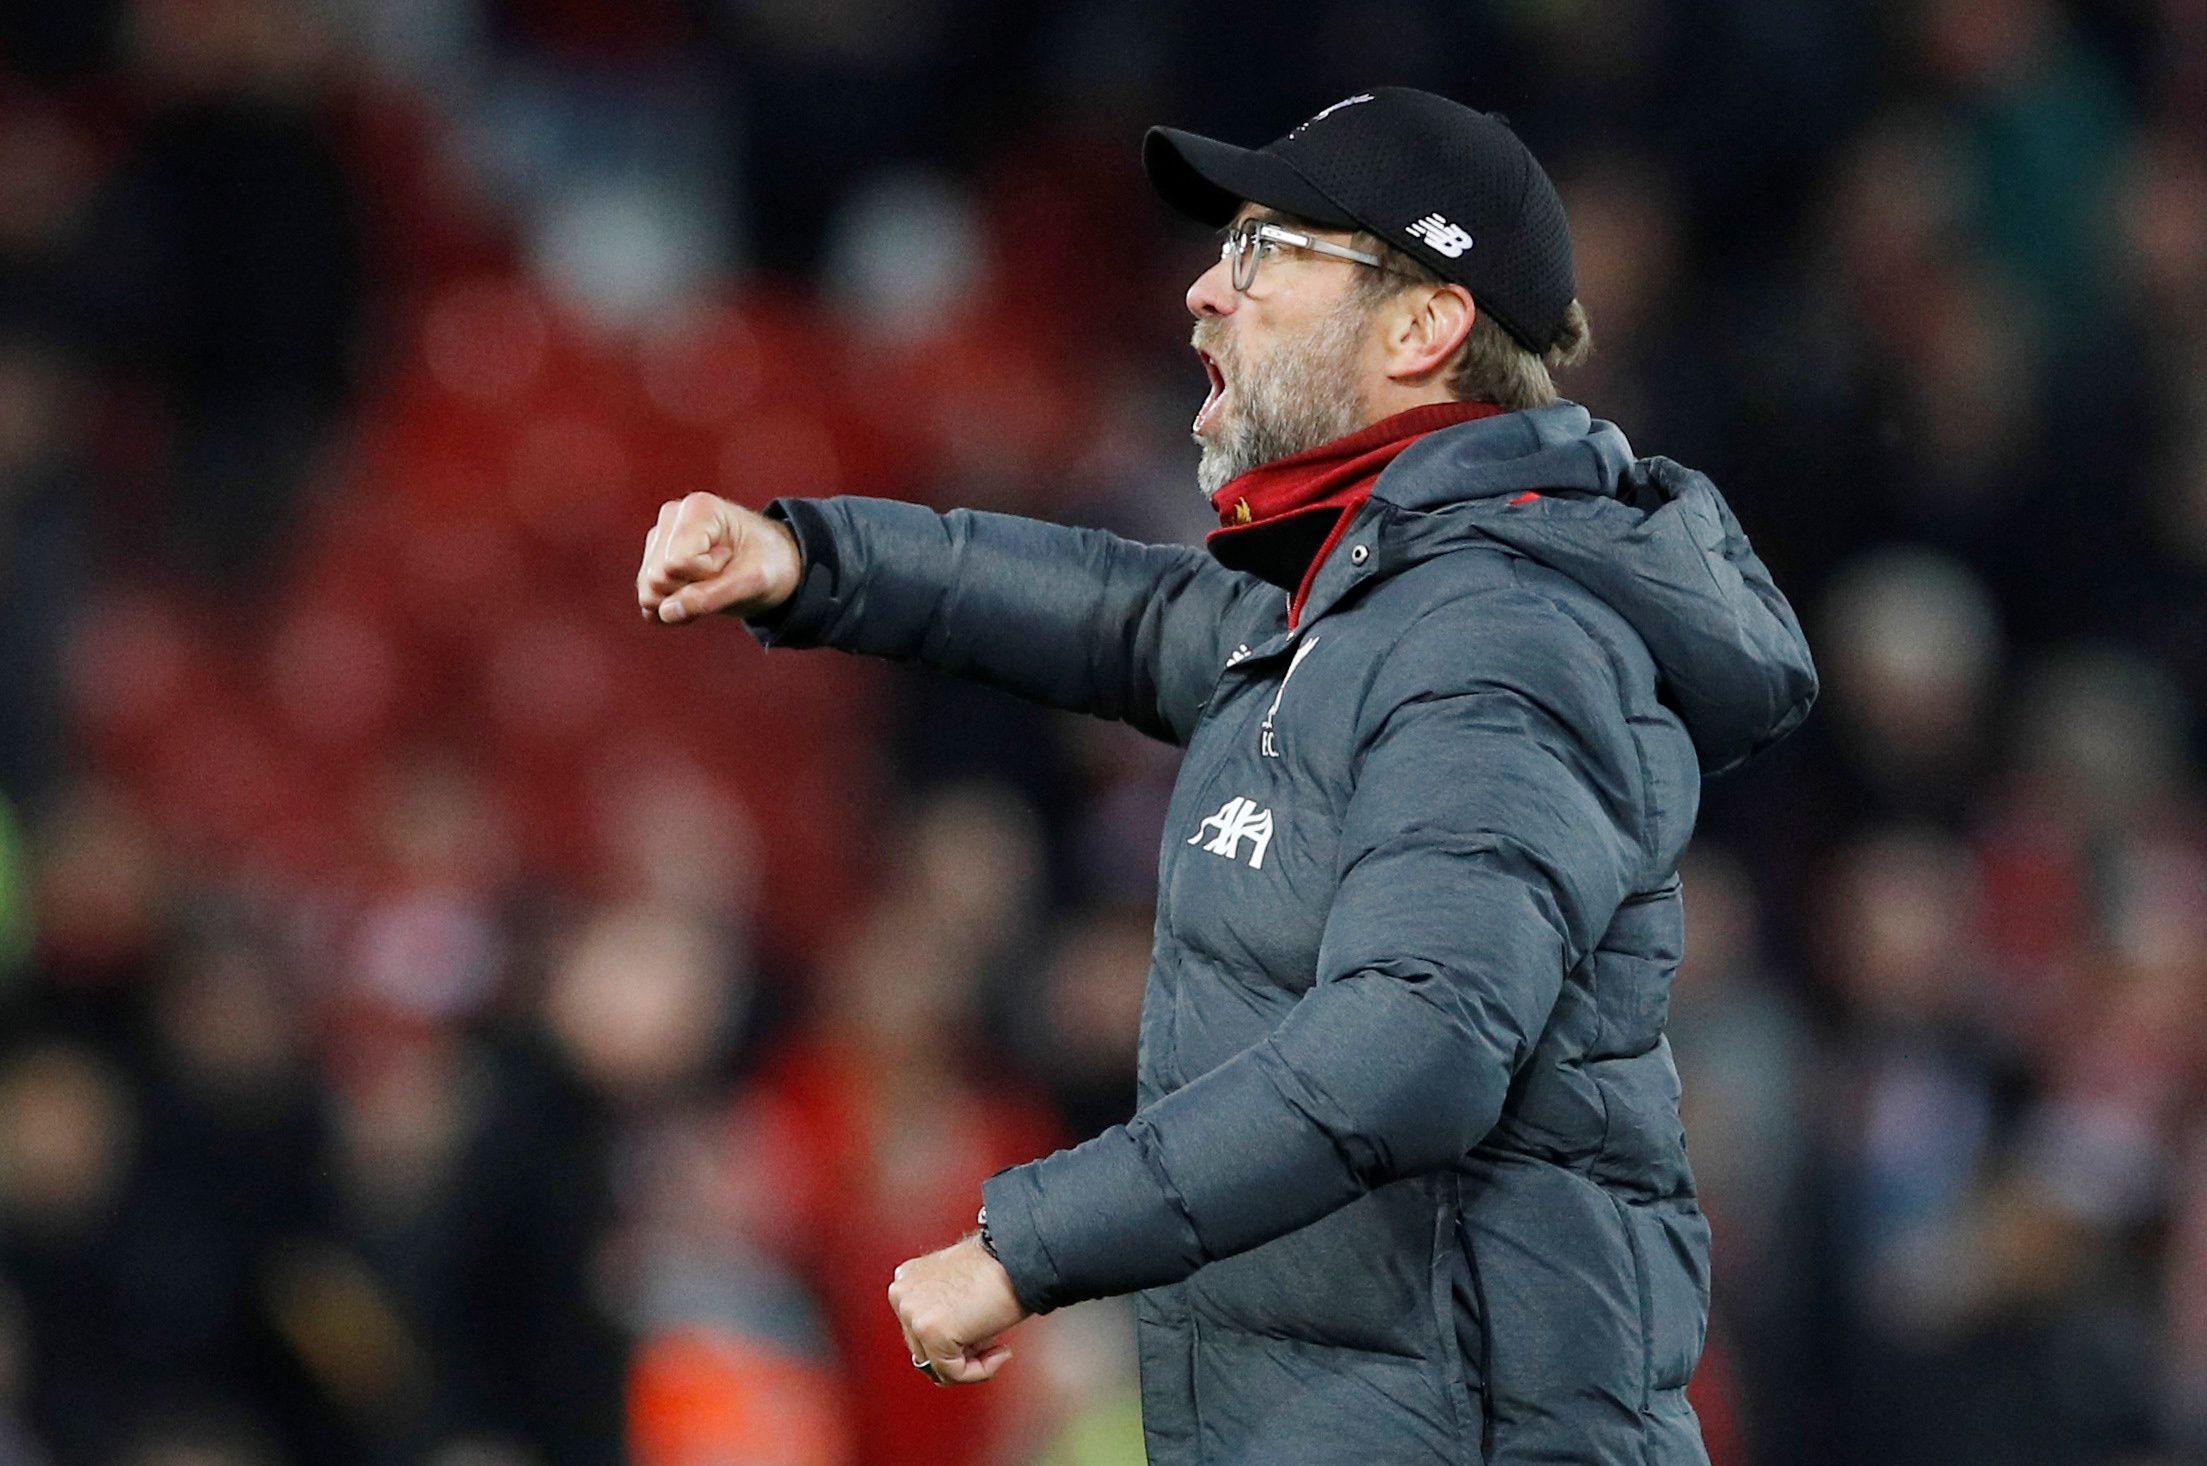 Soccer Football - Premier League - Liverpool v Manchester City - Anfield, Liverpool, Britain - November 10, 2019  Liverpool manager Juergen Klopp celebrates after the match   REUTERS/Phil Noble  EDITORIAL USE ONLY. No use with unauthorized audio, video, data, fixture lists, club/league logos or 